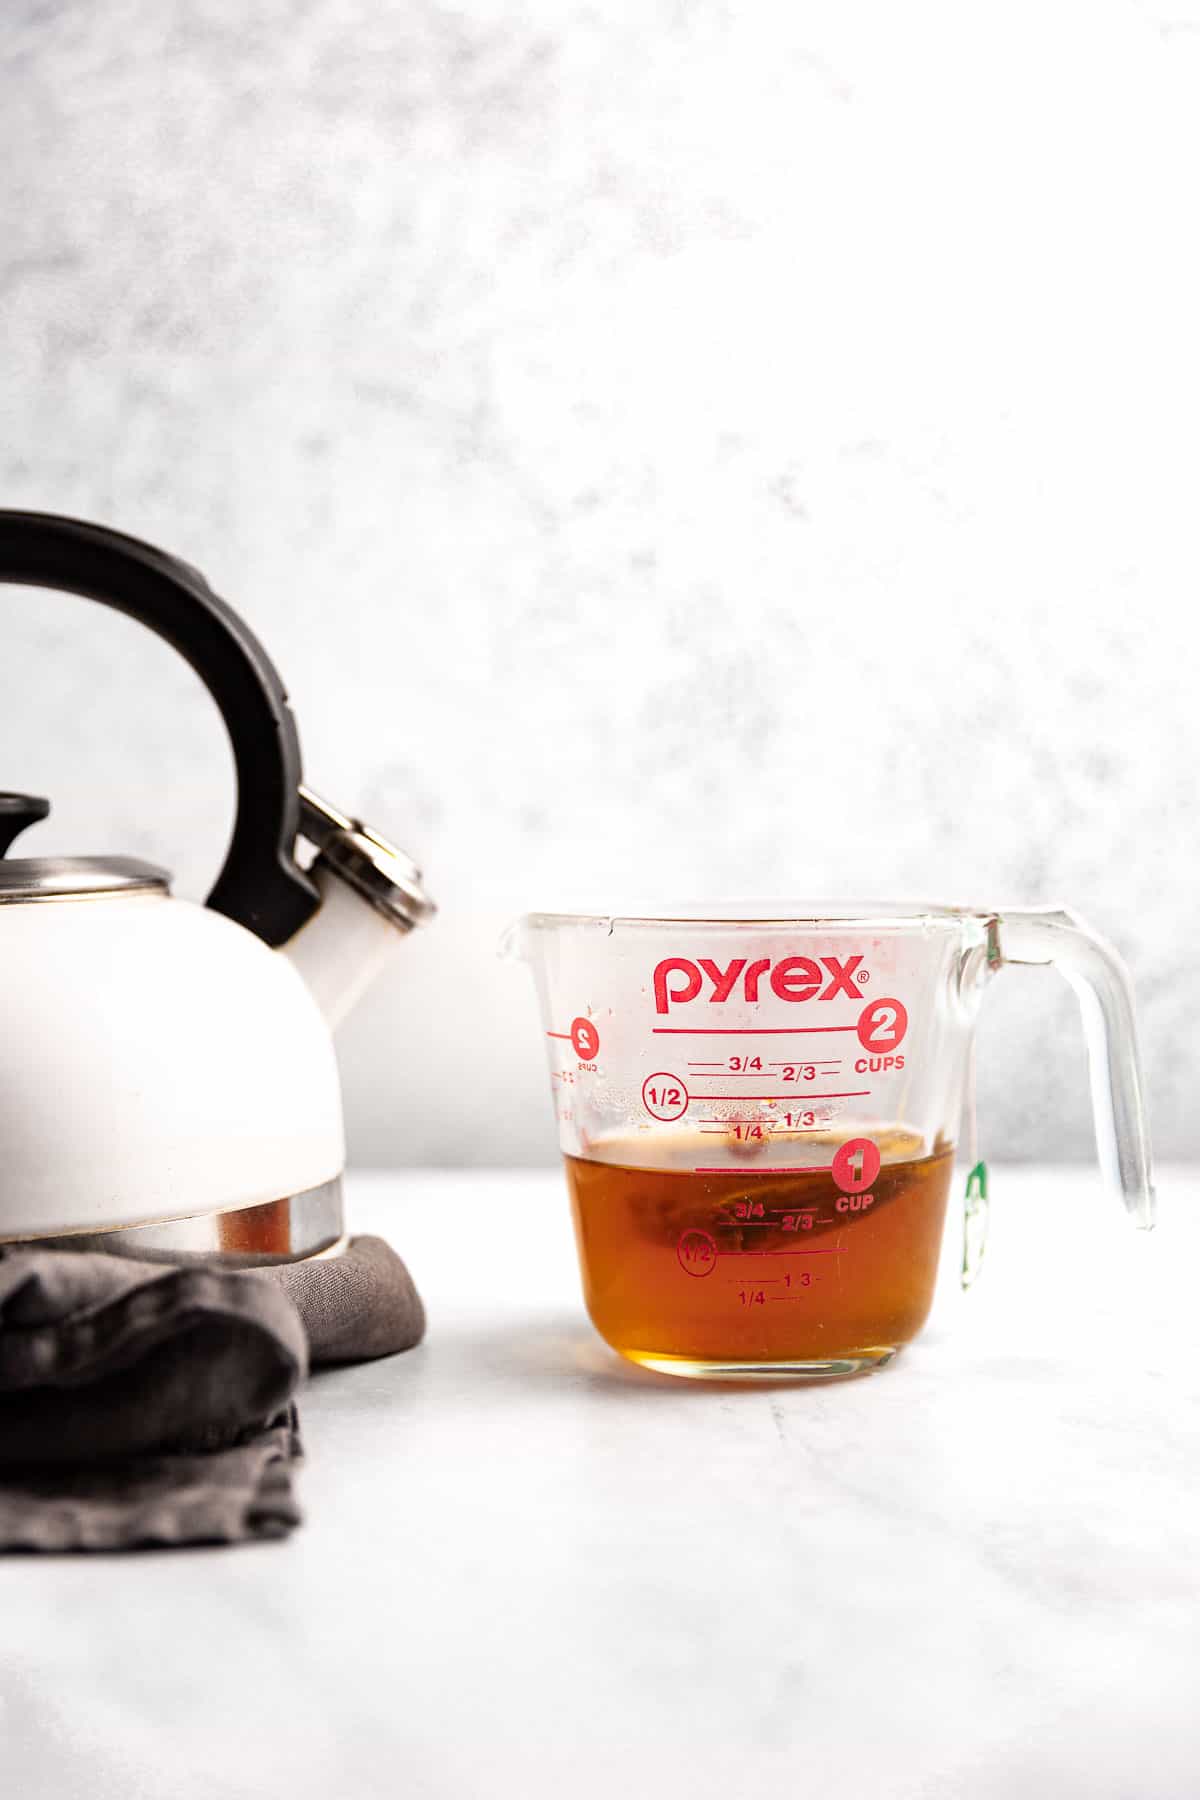 A teabag steeping in a glass measuring pitcher half filled with hot water.